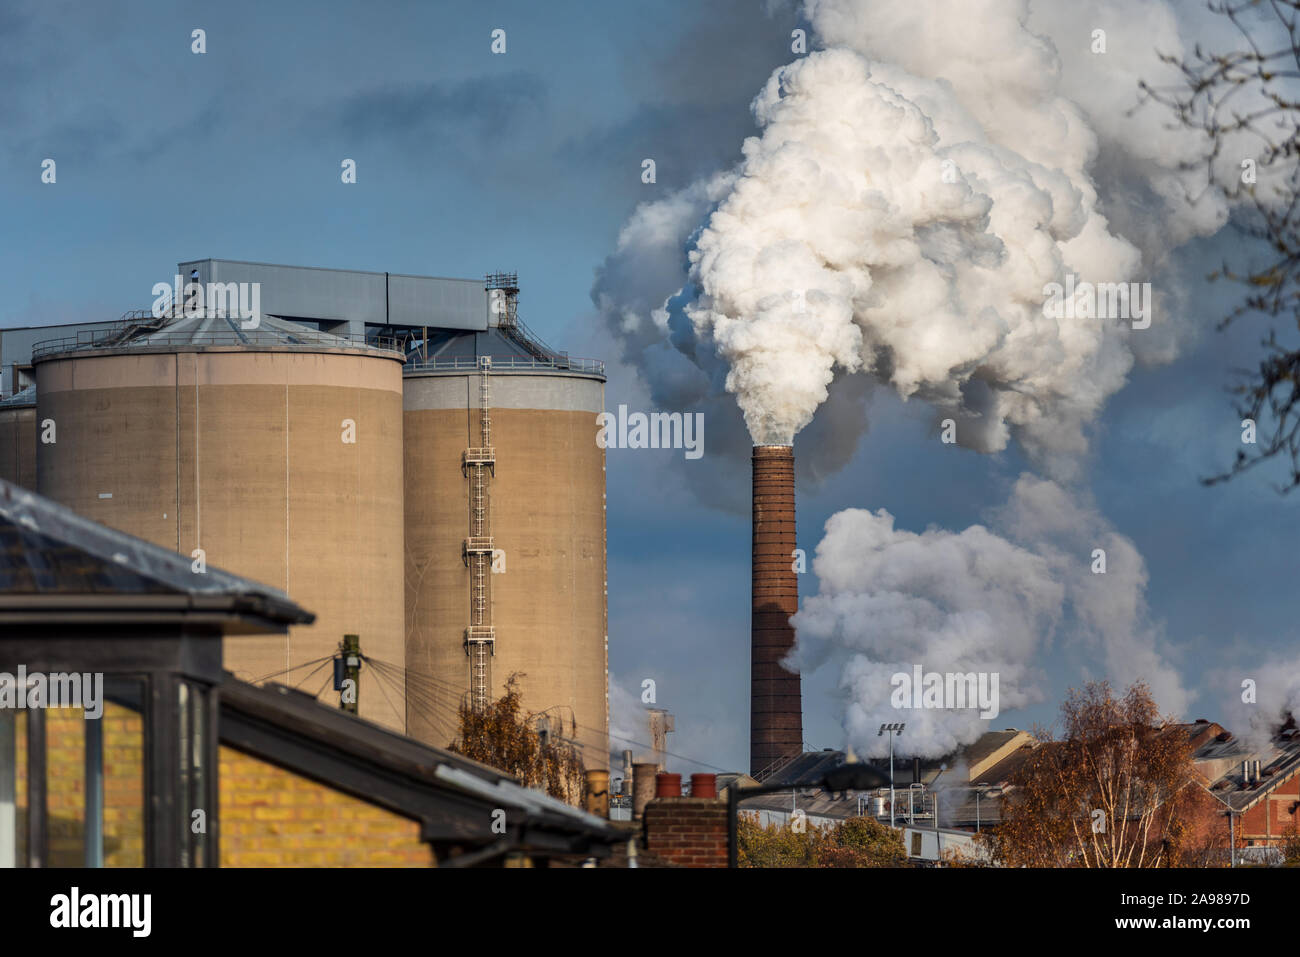 UK Factory emissions - Sugar Beet Factory Chimneys - steam rises from the British Sugar factory in Bury St Edmunds Suffolk UK Stock Photo